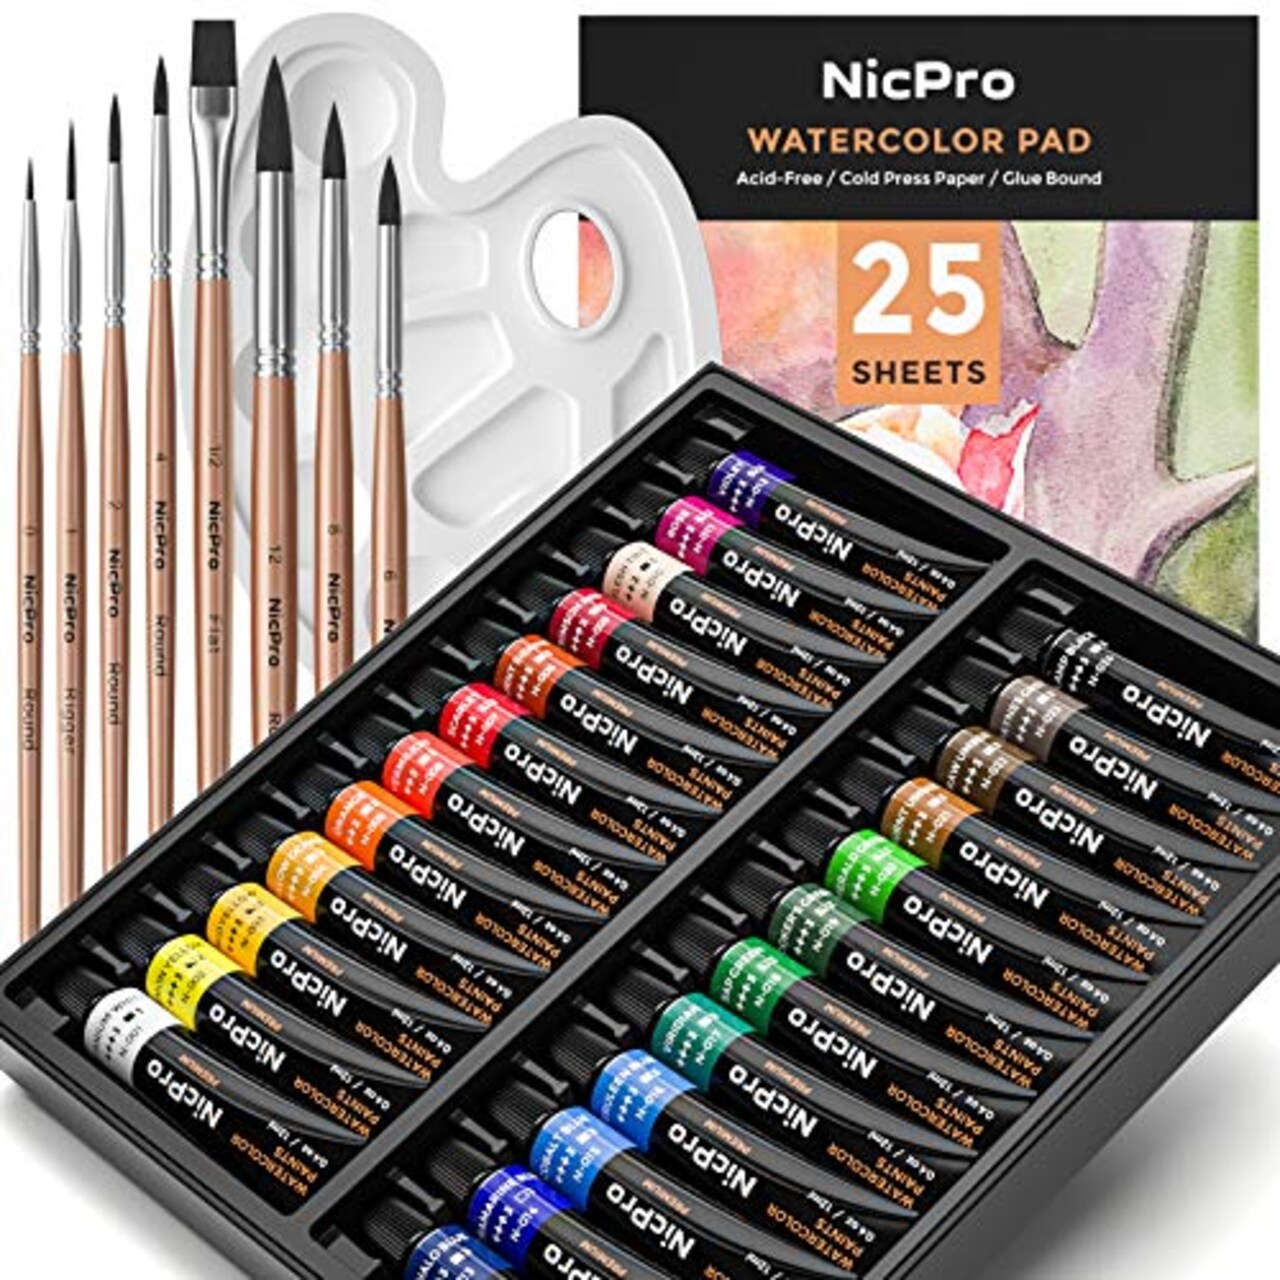 Nicpro 60PCS Watercolor Paint Kit, Professional Painting Supplies Set 24  Tube Water Color Paints, 8 Synthetic Squirrel Brushes, 25 Paper Pad, Palette,  Color Wheel for Artists, Beginners, Kids, Adults